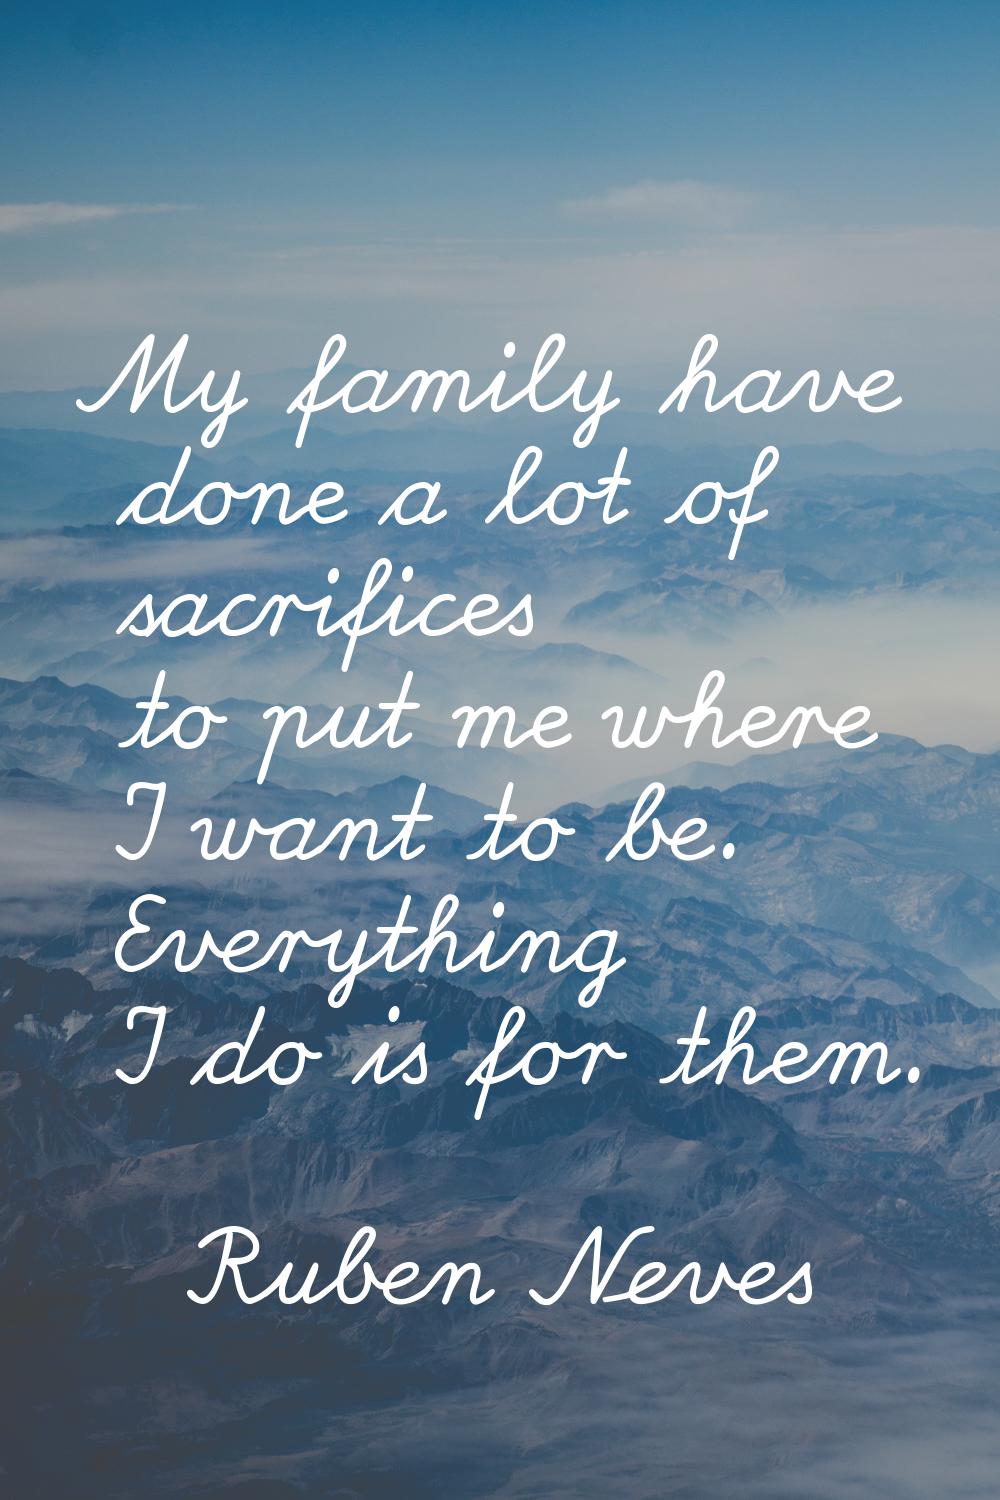 My family have done a lot of sacrifices to put me where I want to be. Everything I do is for them.